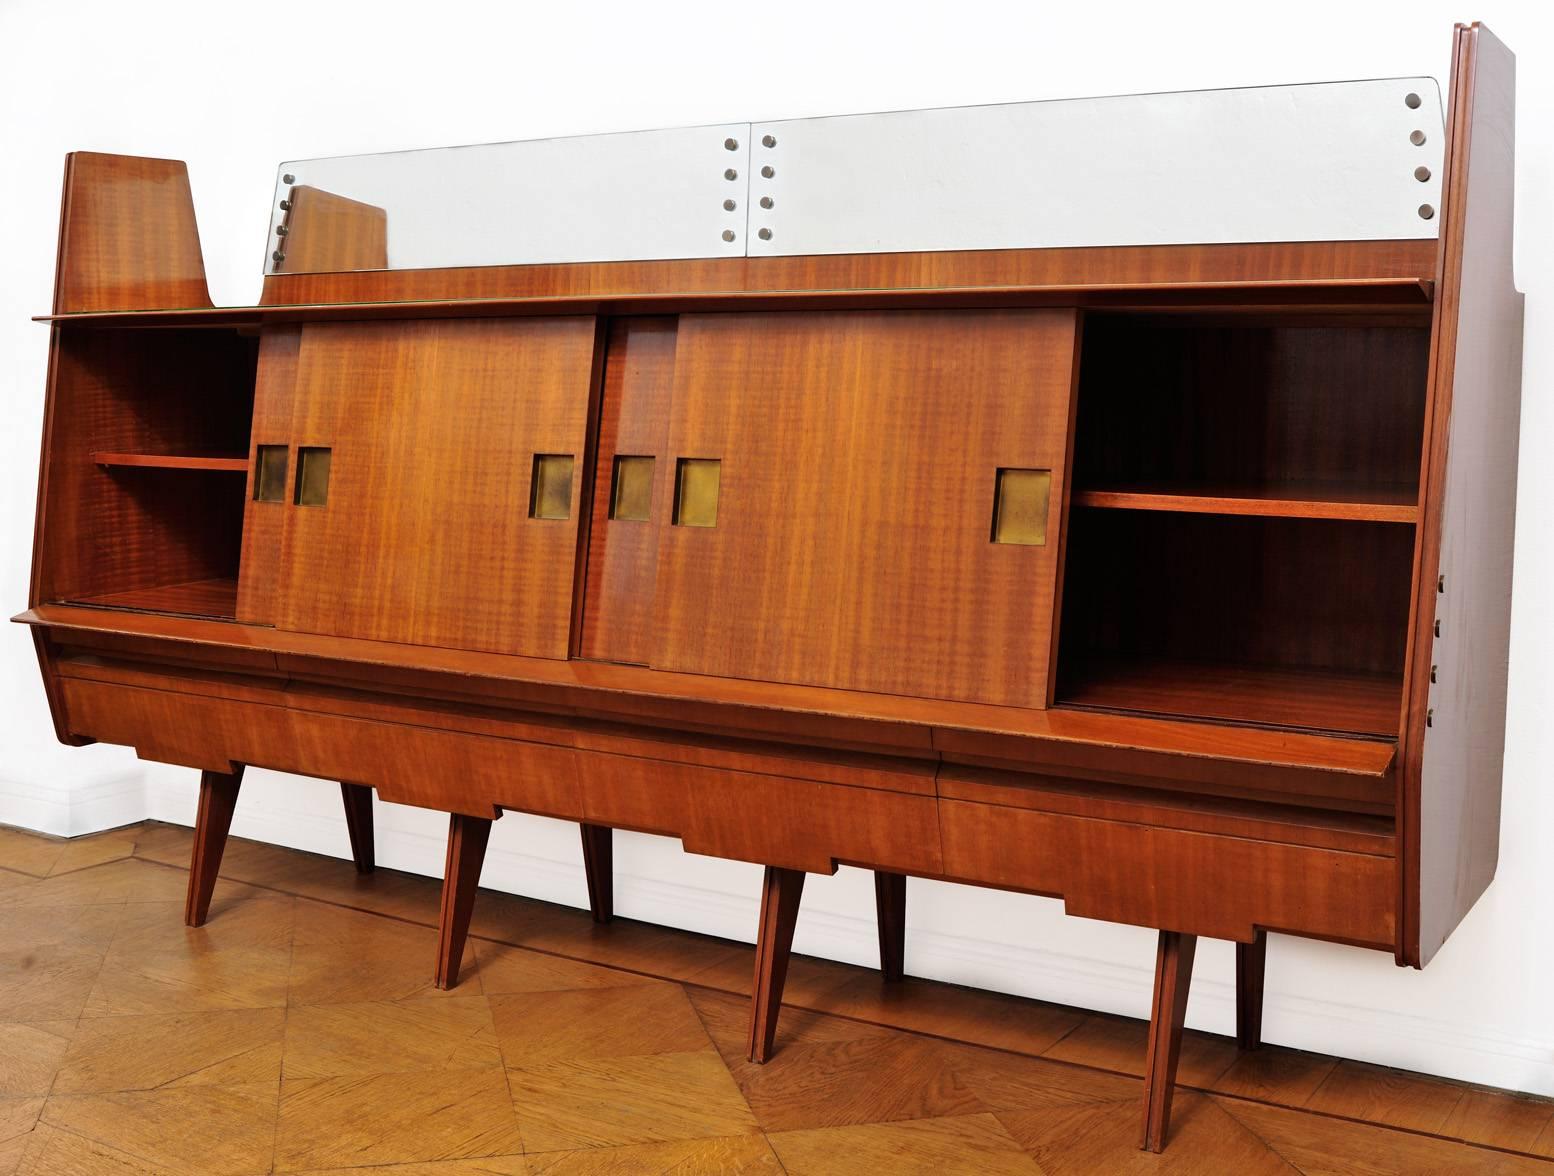 20th Century Italian Sideboard 1960s Made of Teak, Brass, Glass and Mirror For Sale 1